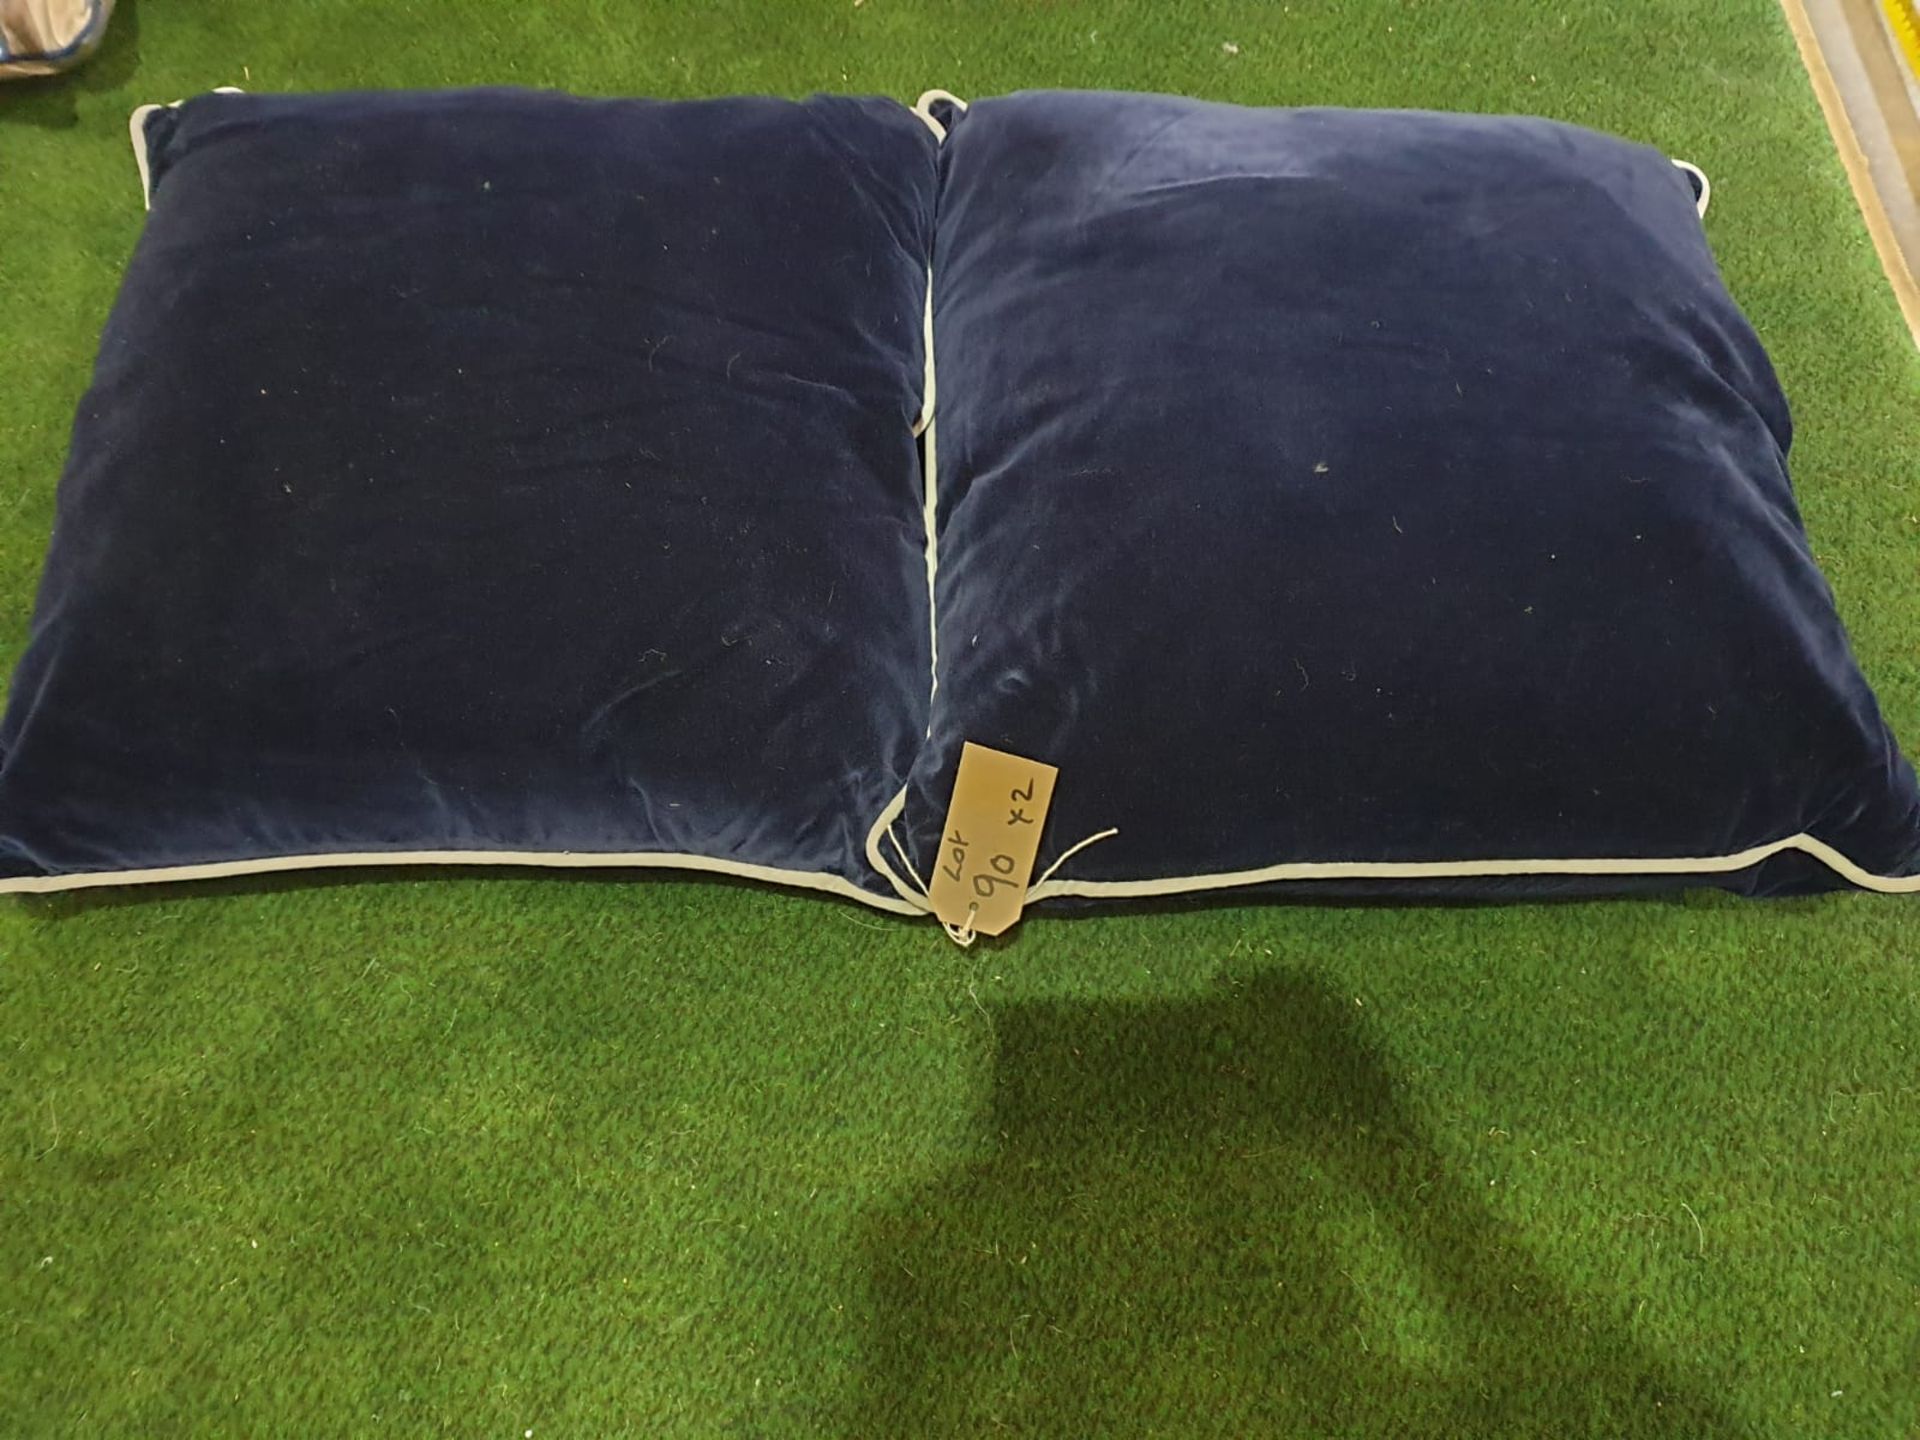 A Set Of 2 X Cushions Navy Velvet With Piping 60cm (ST90)